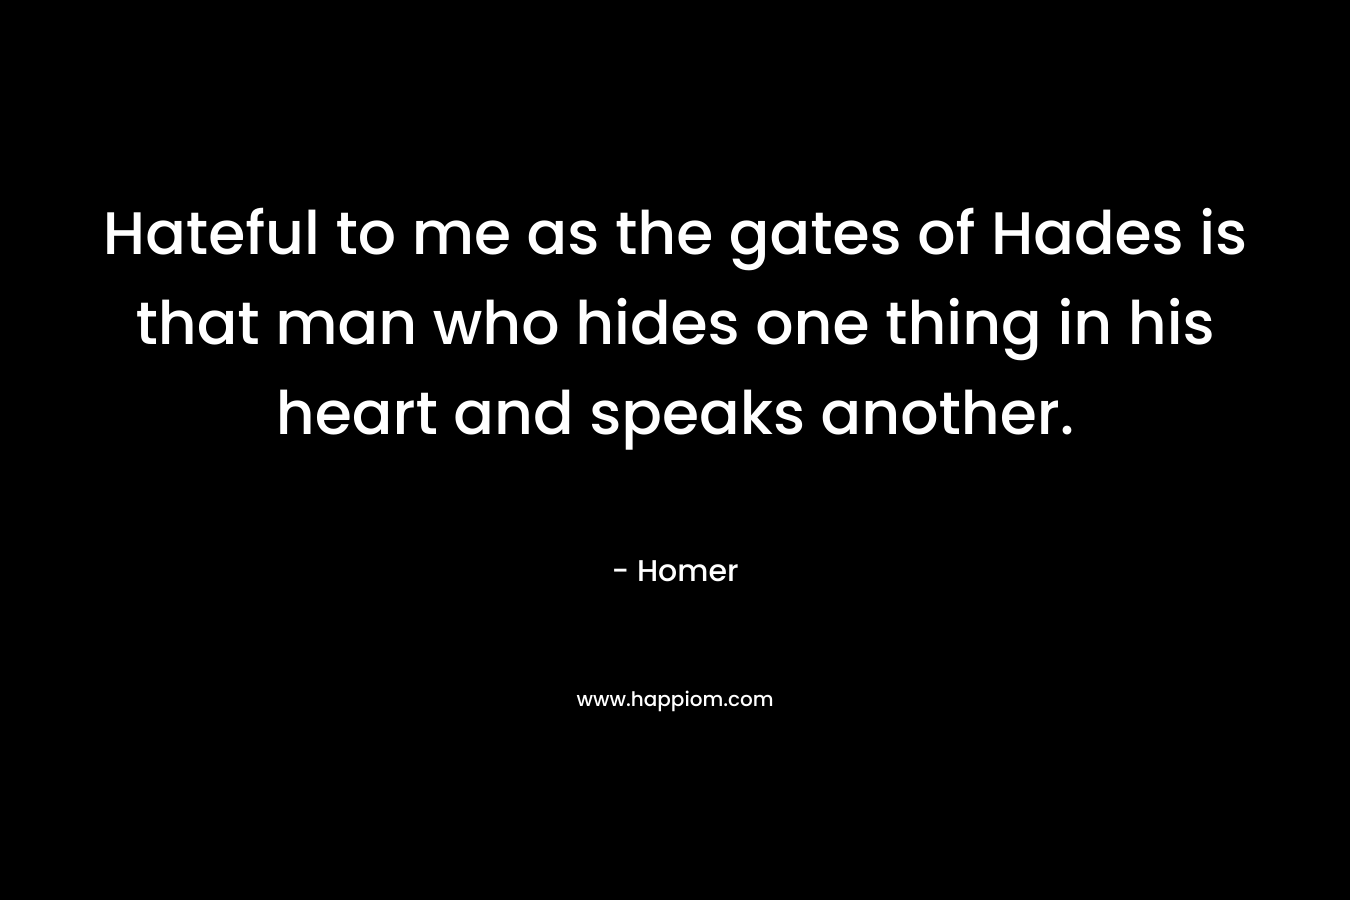 Hateful to me as the gates of Hades is that man who hides one thing in his heart and speaks another. – Homer